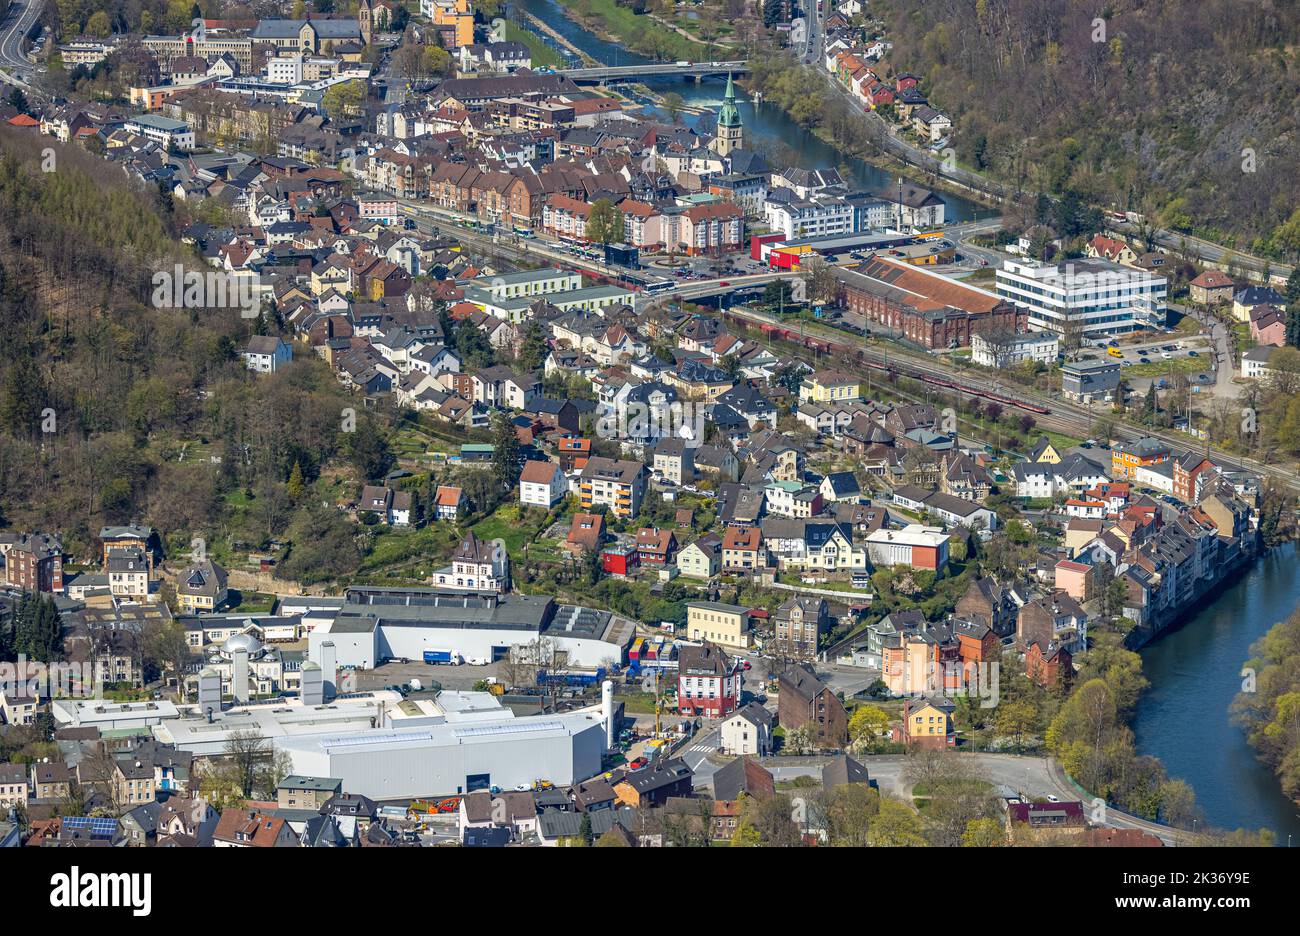 Aerial view, Protestant Reformed Church Hohenlimburg in the city center at the river Lenne, Hohenlimburg, Ruhr area, North Rhine-Westphalia, Germany, Stock Photo